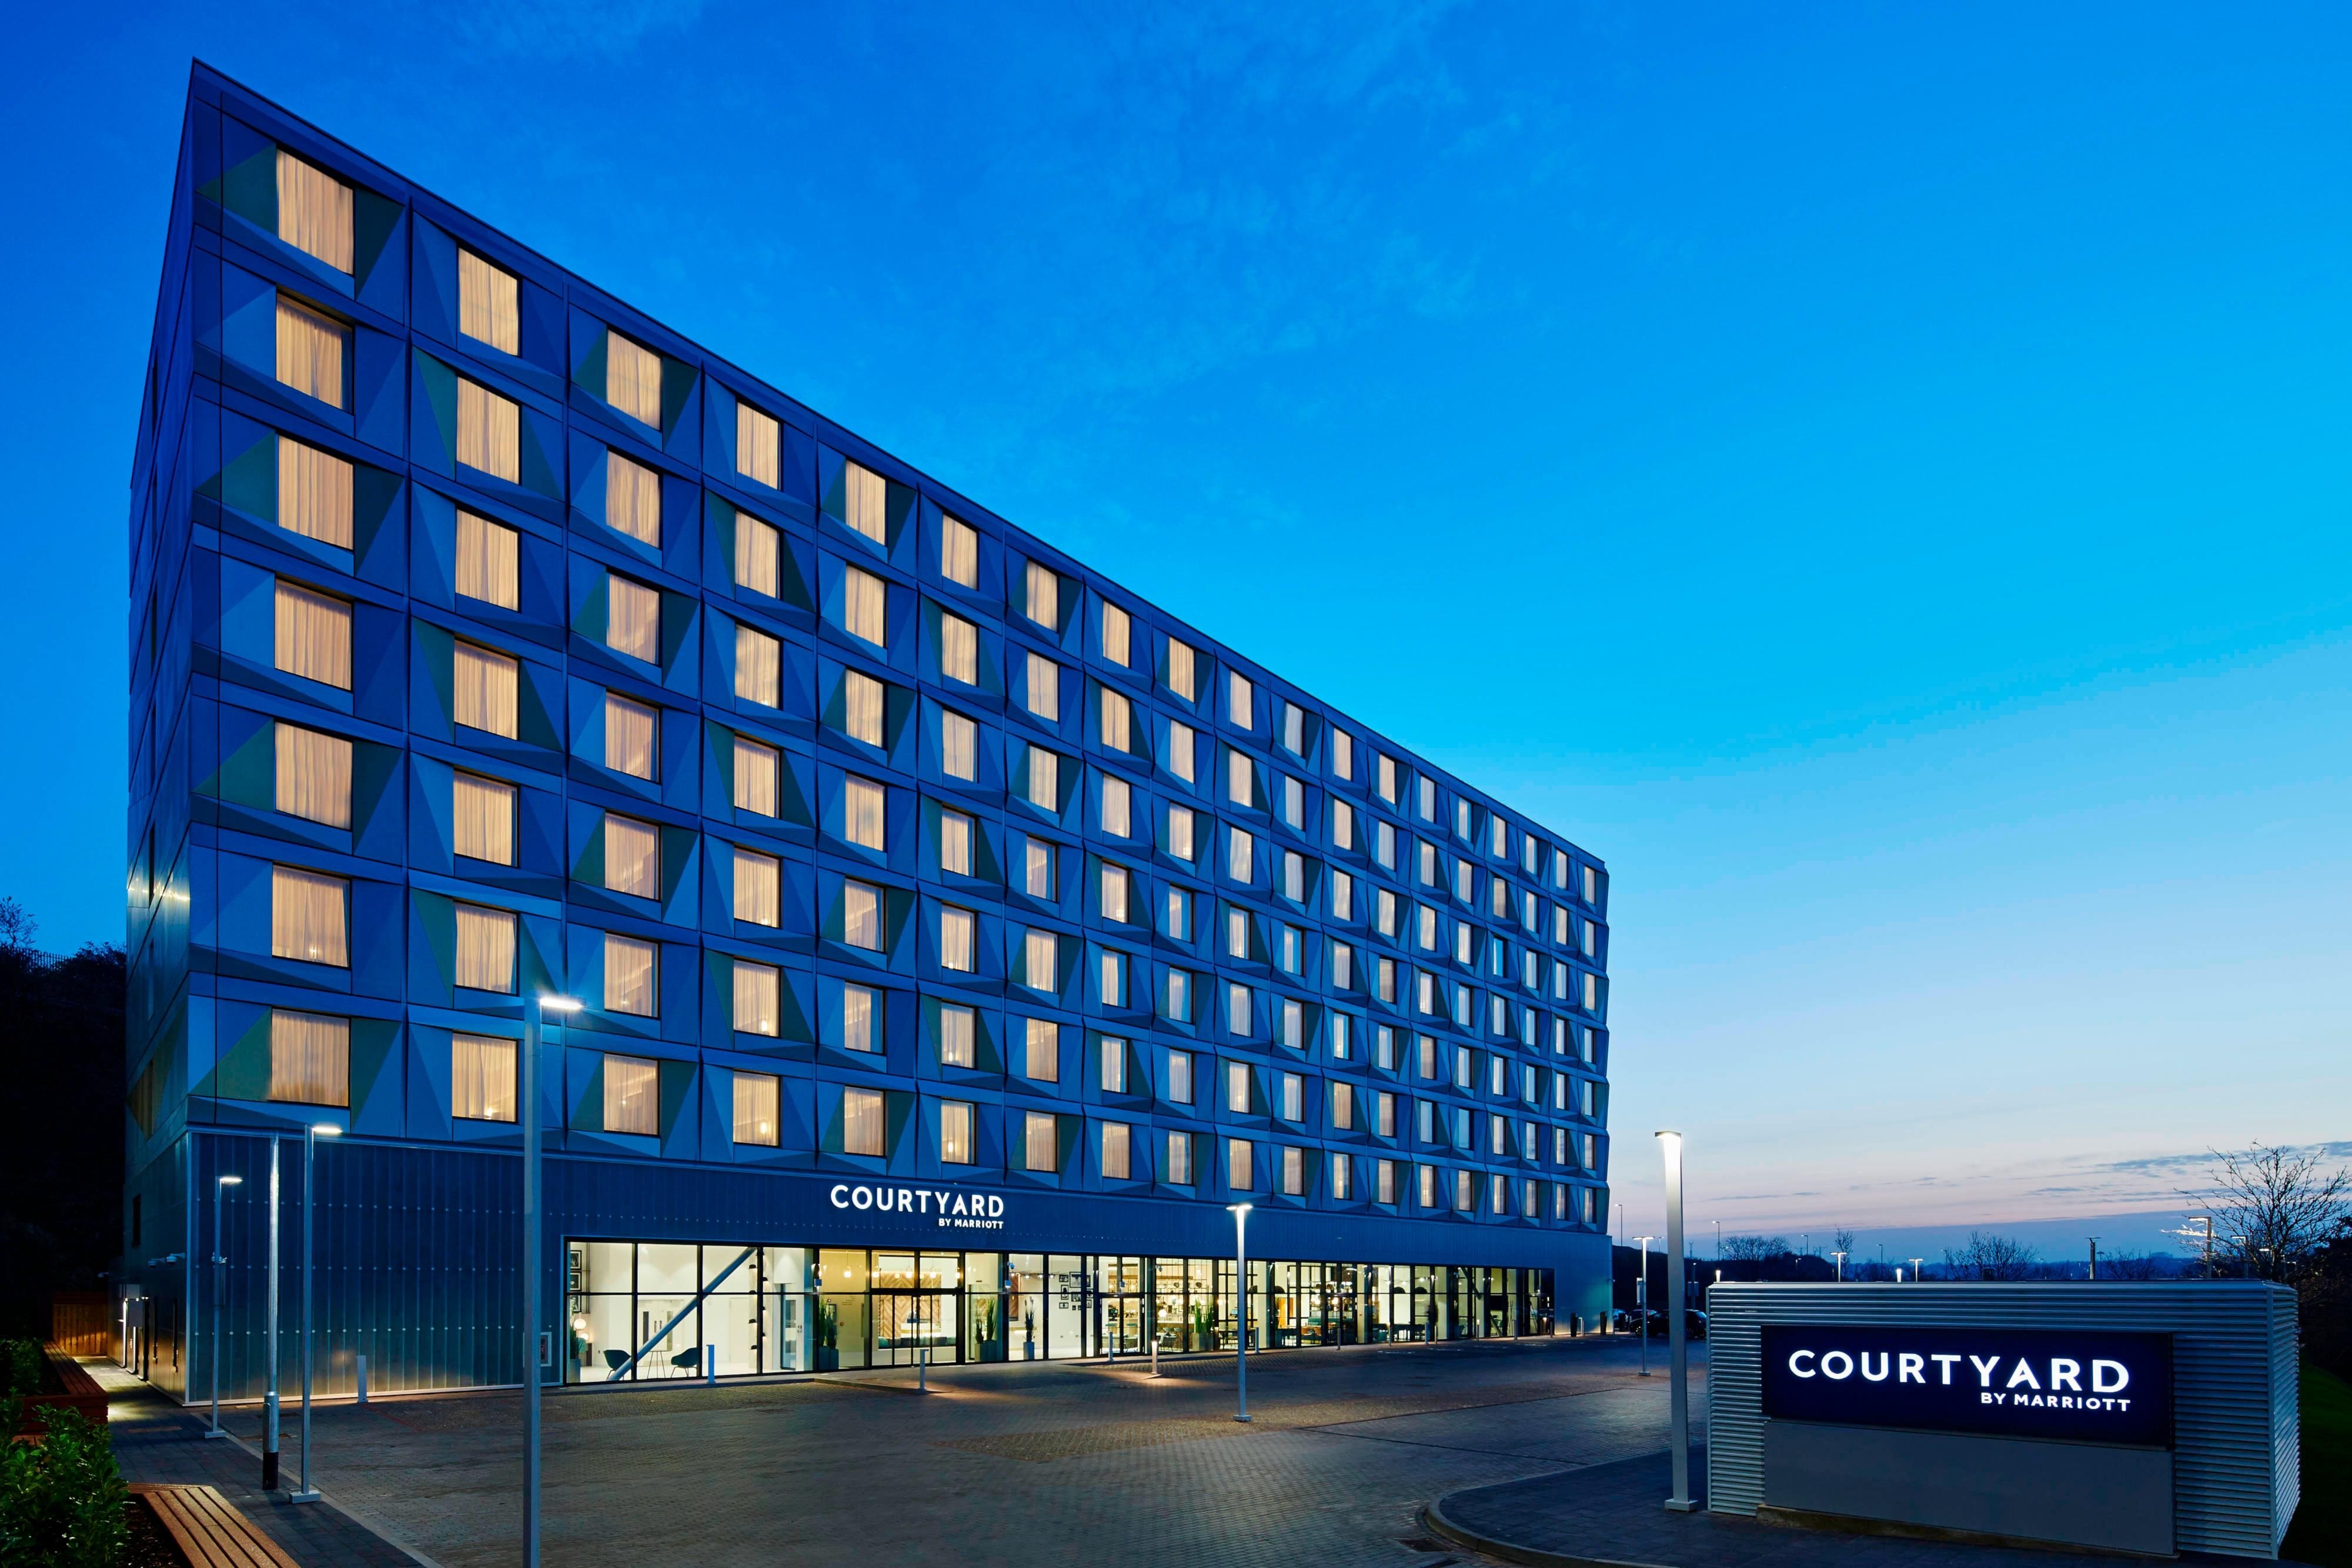 Courtyard by Marriott Luton Airport image